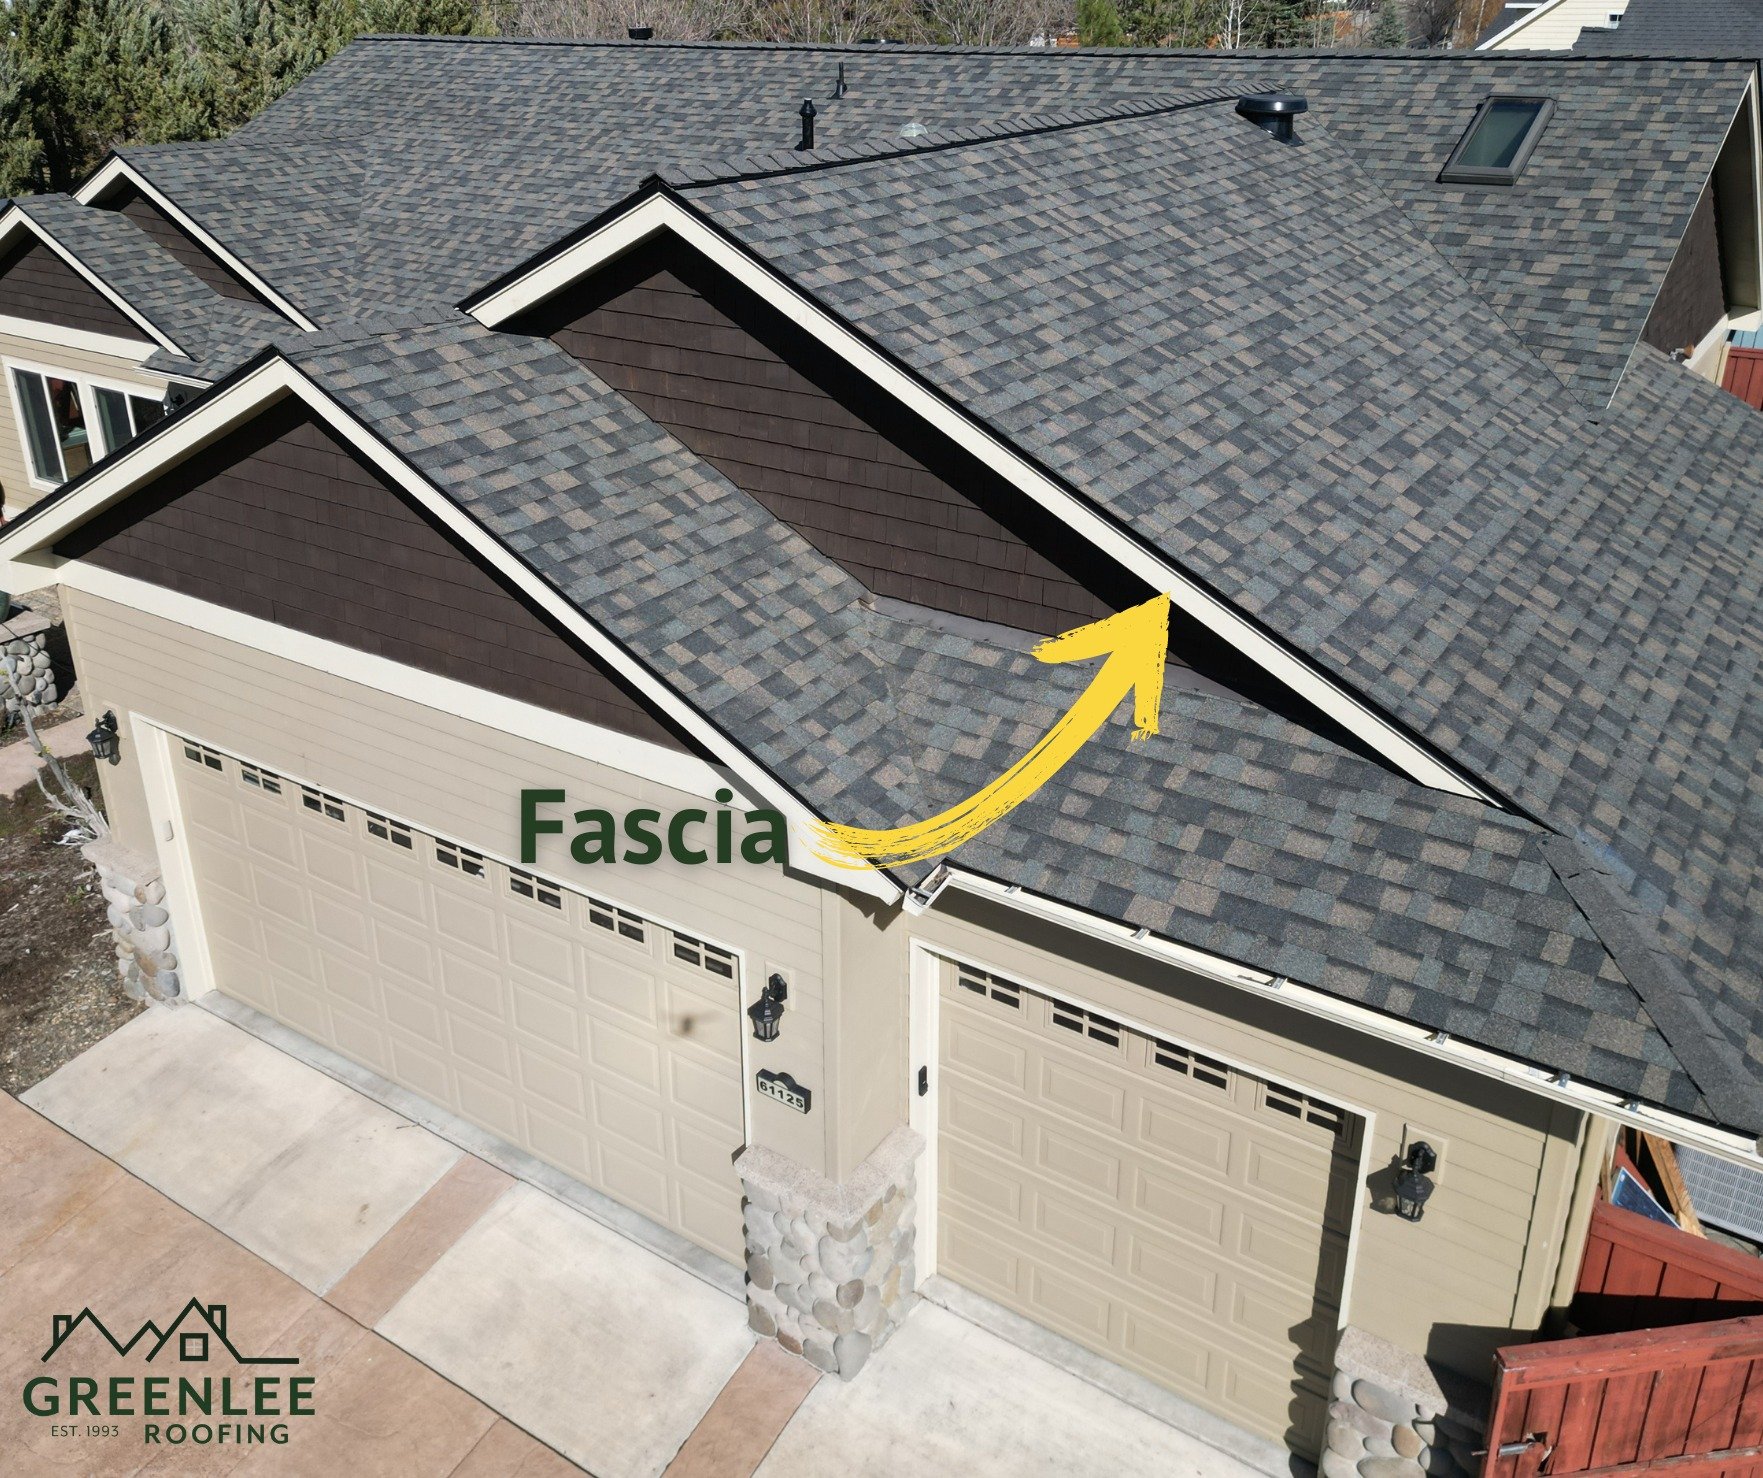 This dark variegated roof looks stunning against the white fascia on this home! The fascia supports the roof, shingles, and gutter. It also helps to keep moisture away from the house as well as giving the roof and home a more finished look. We think 